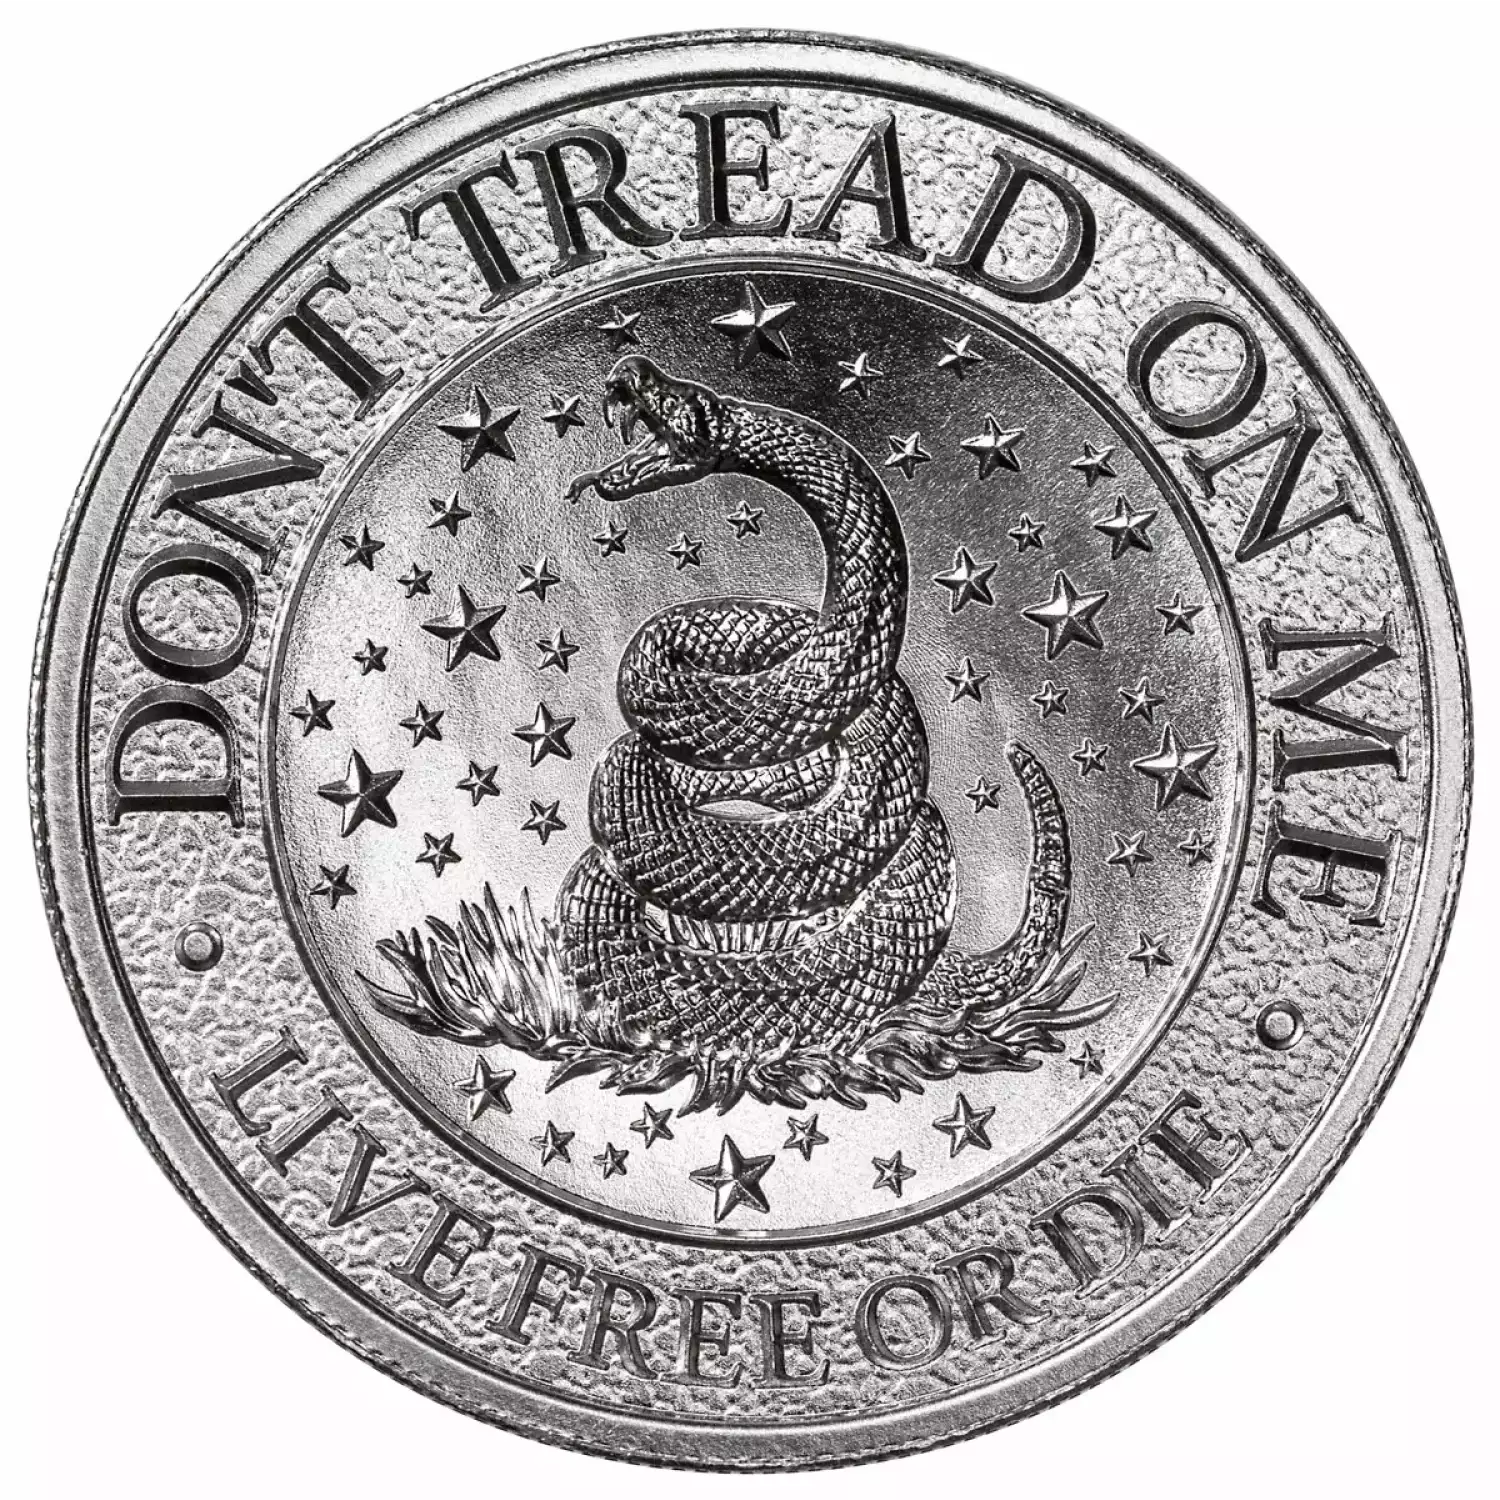 Intaglio Mint 2 oz Silver High Relief Round Don't Tread on Me